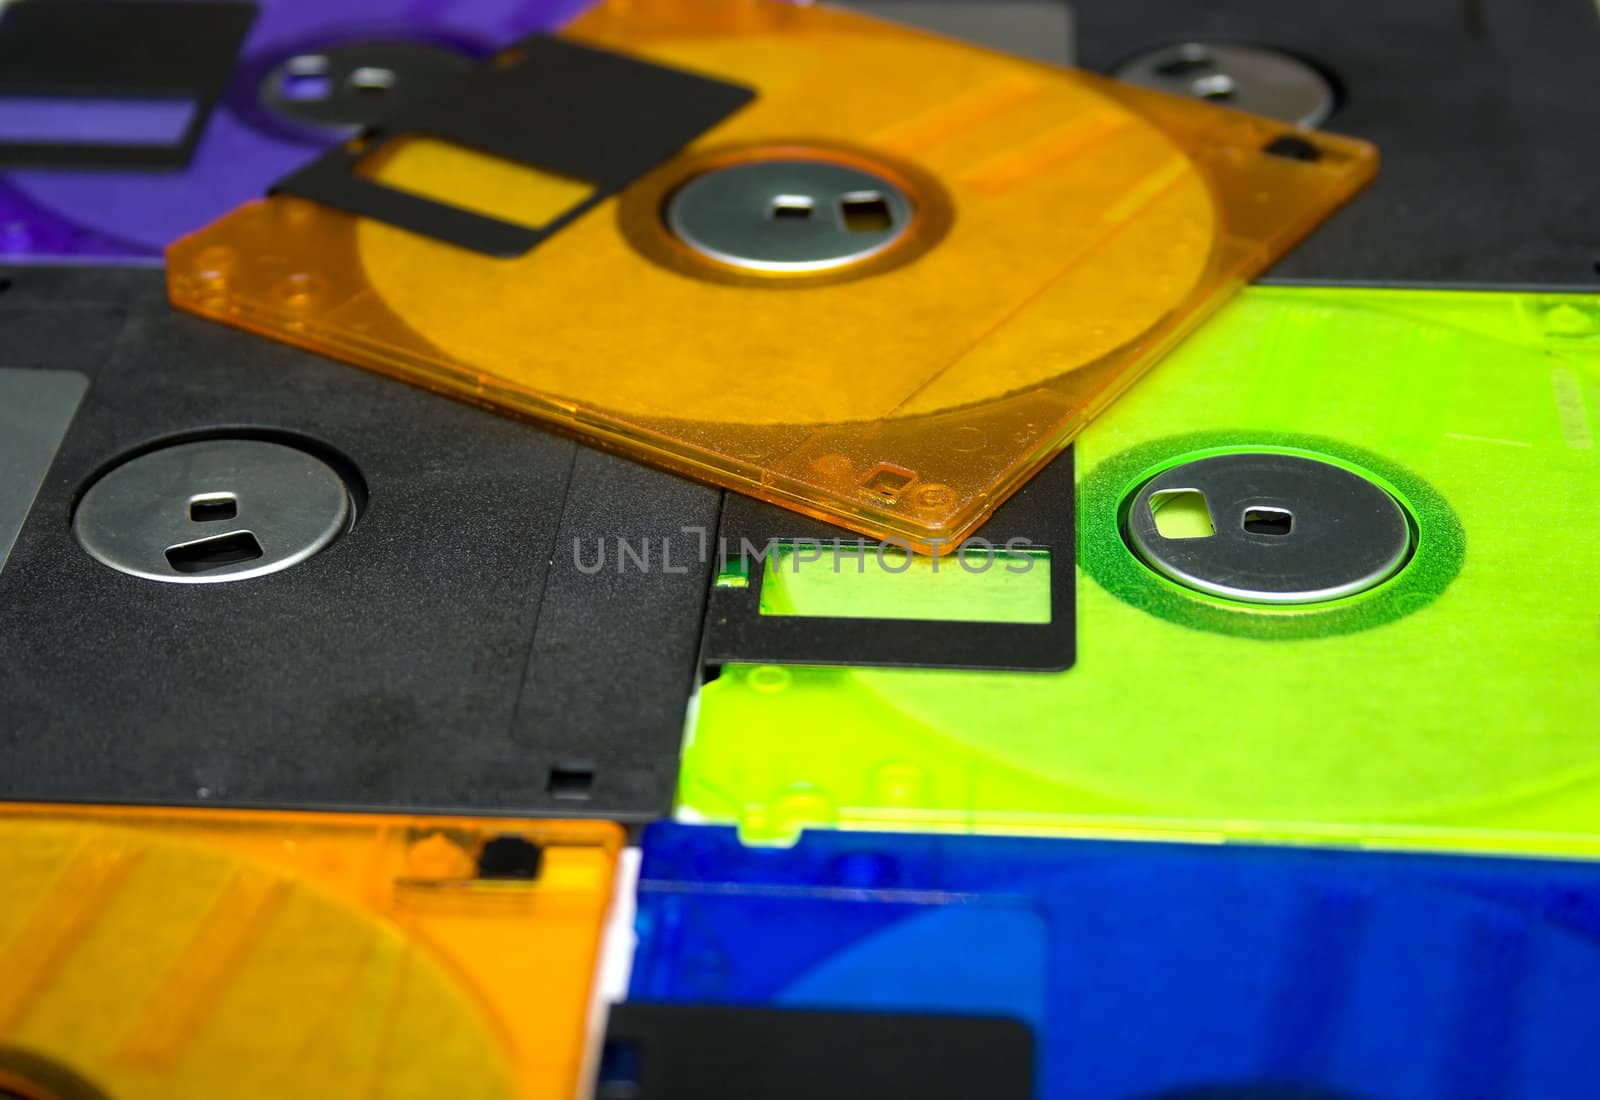 Background consisting of several diskettes of different colorA? Shallow DOF